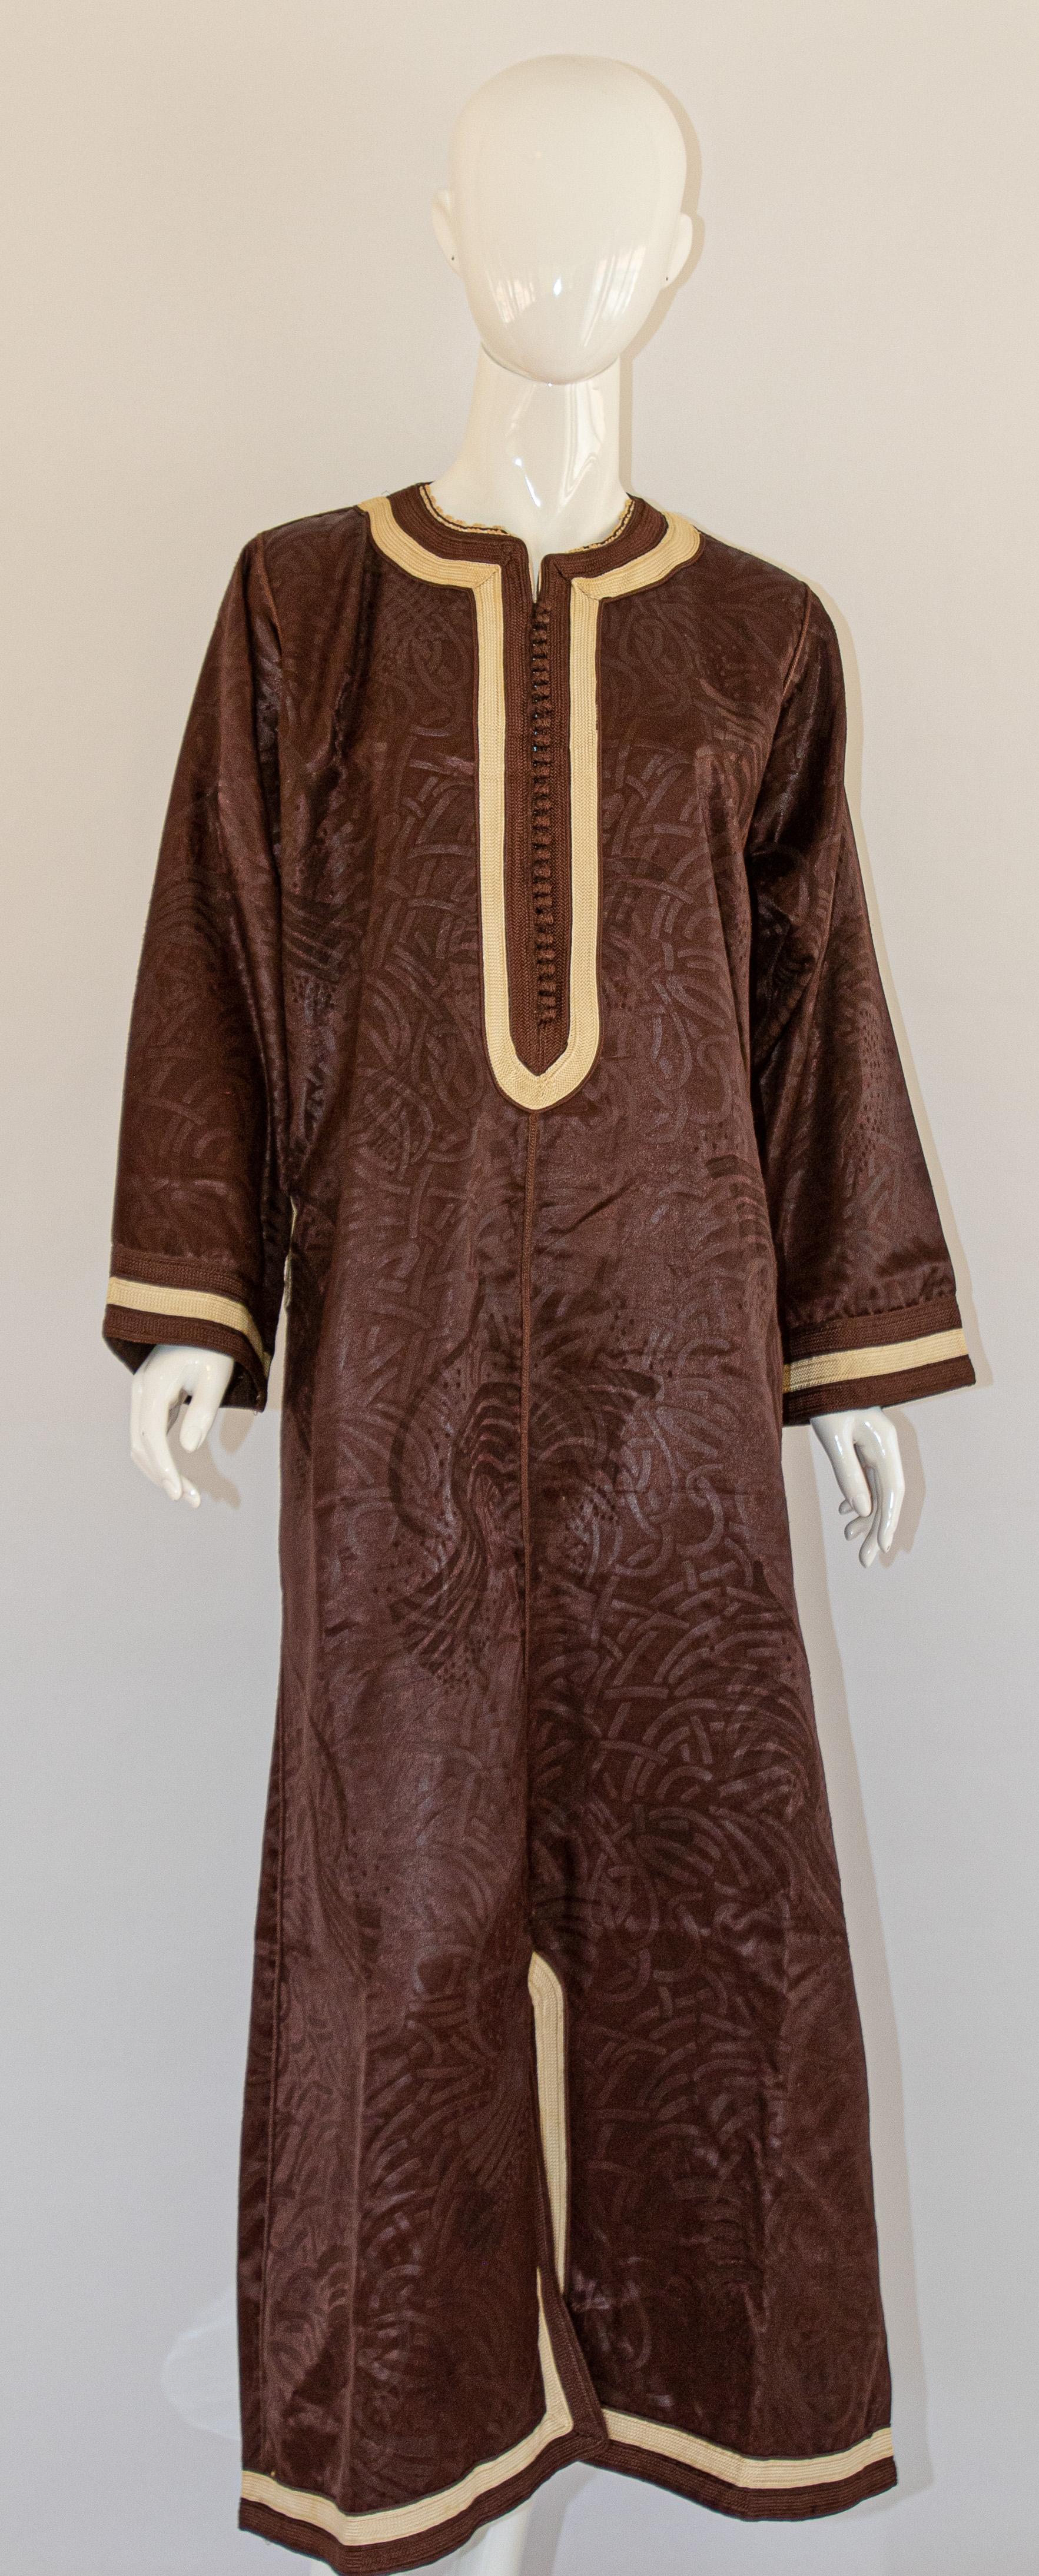 Vintage Moorish Moroccan brown caftan, circa 1970s.
Vintage Moorish Maxi Dress kaftan in brown color with gold trim embroideries.
Long sleeves, side pockets.
Size medium to large. Unisex.
Measurements: 
Bust: 44